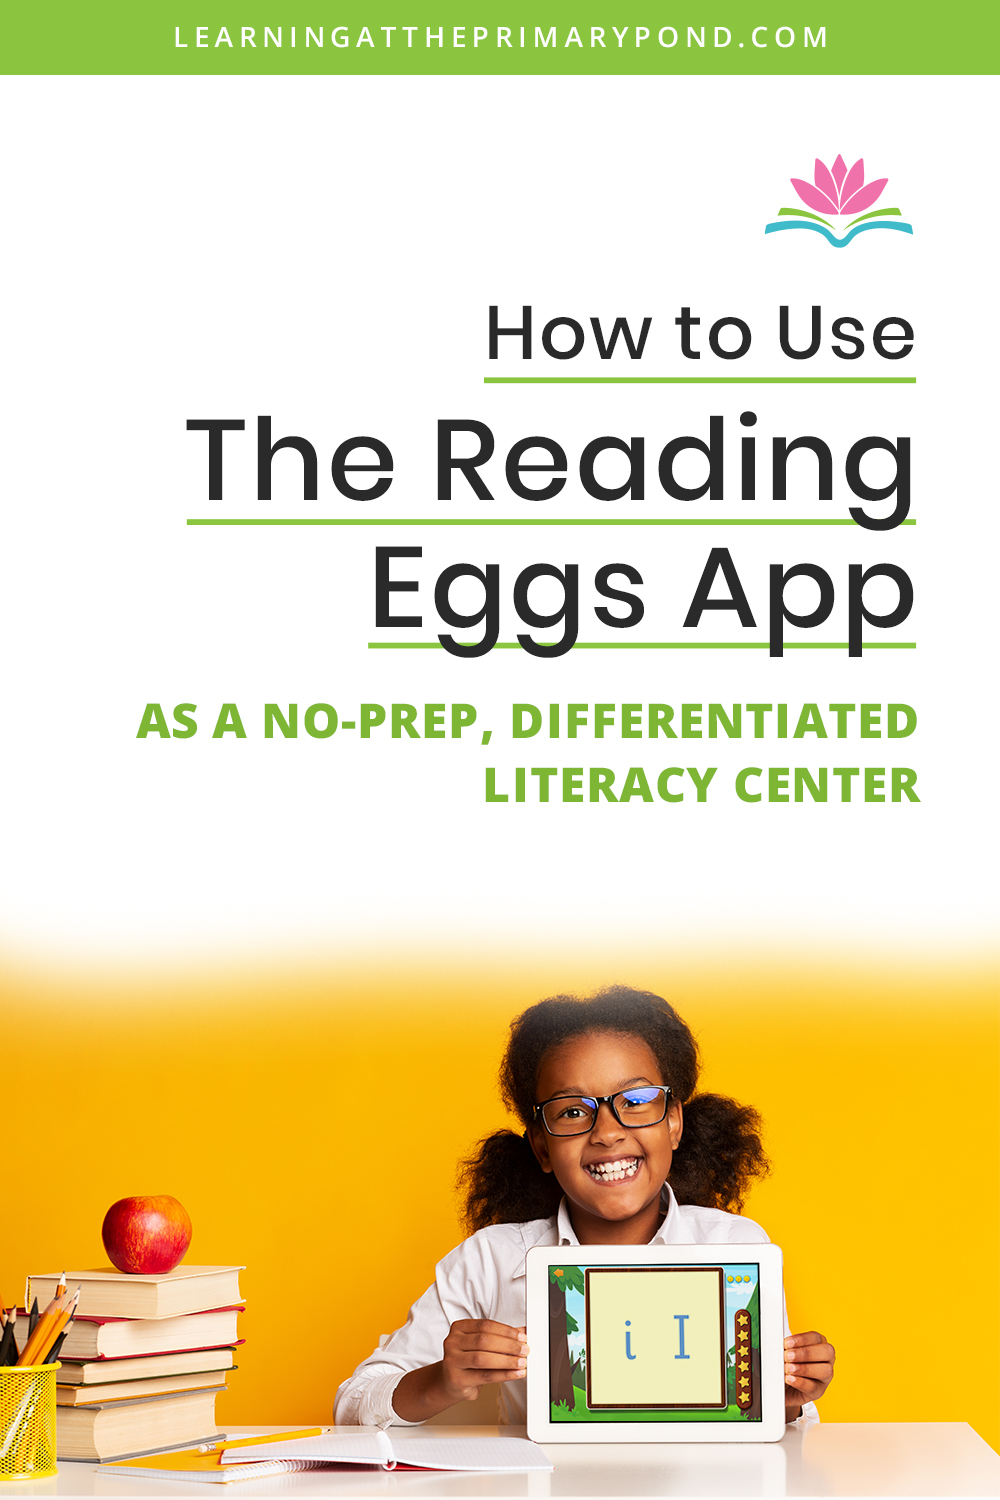 How to Use the Reading Eggs App as a No-Prep, Differentiated Literacy Center